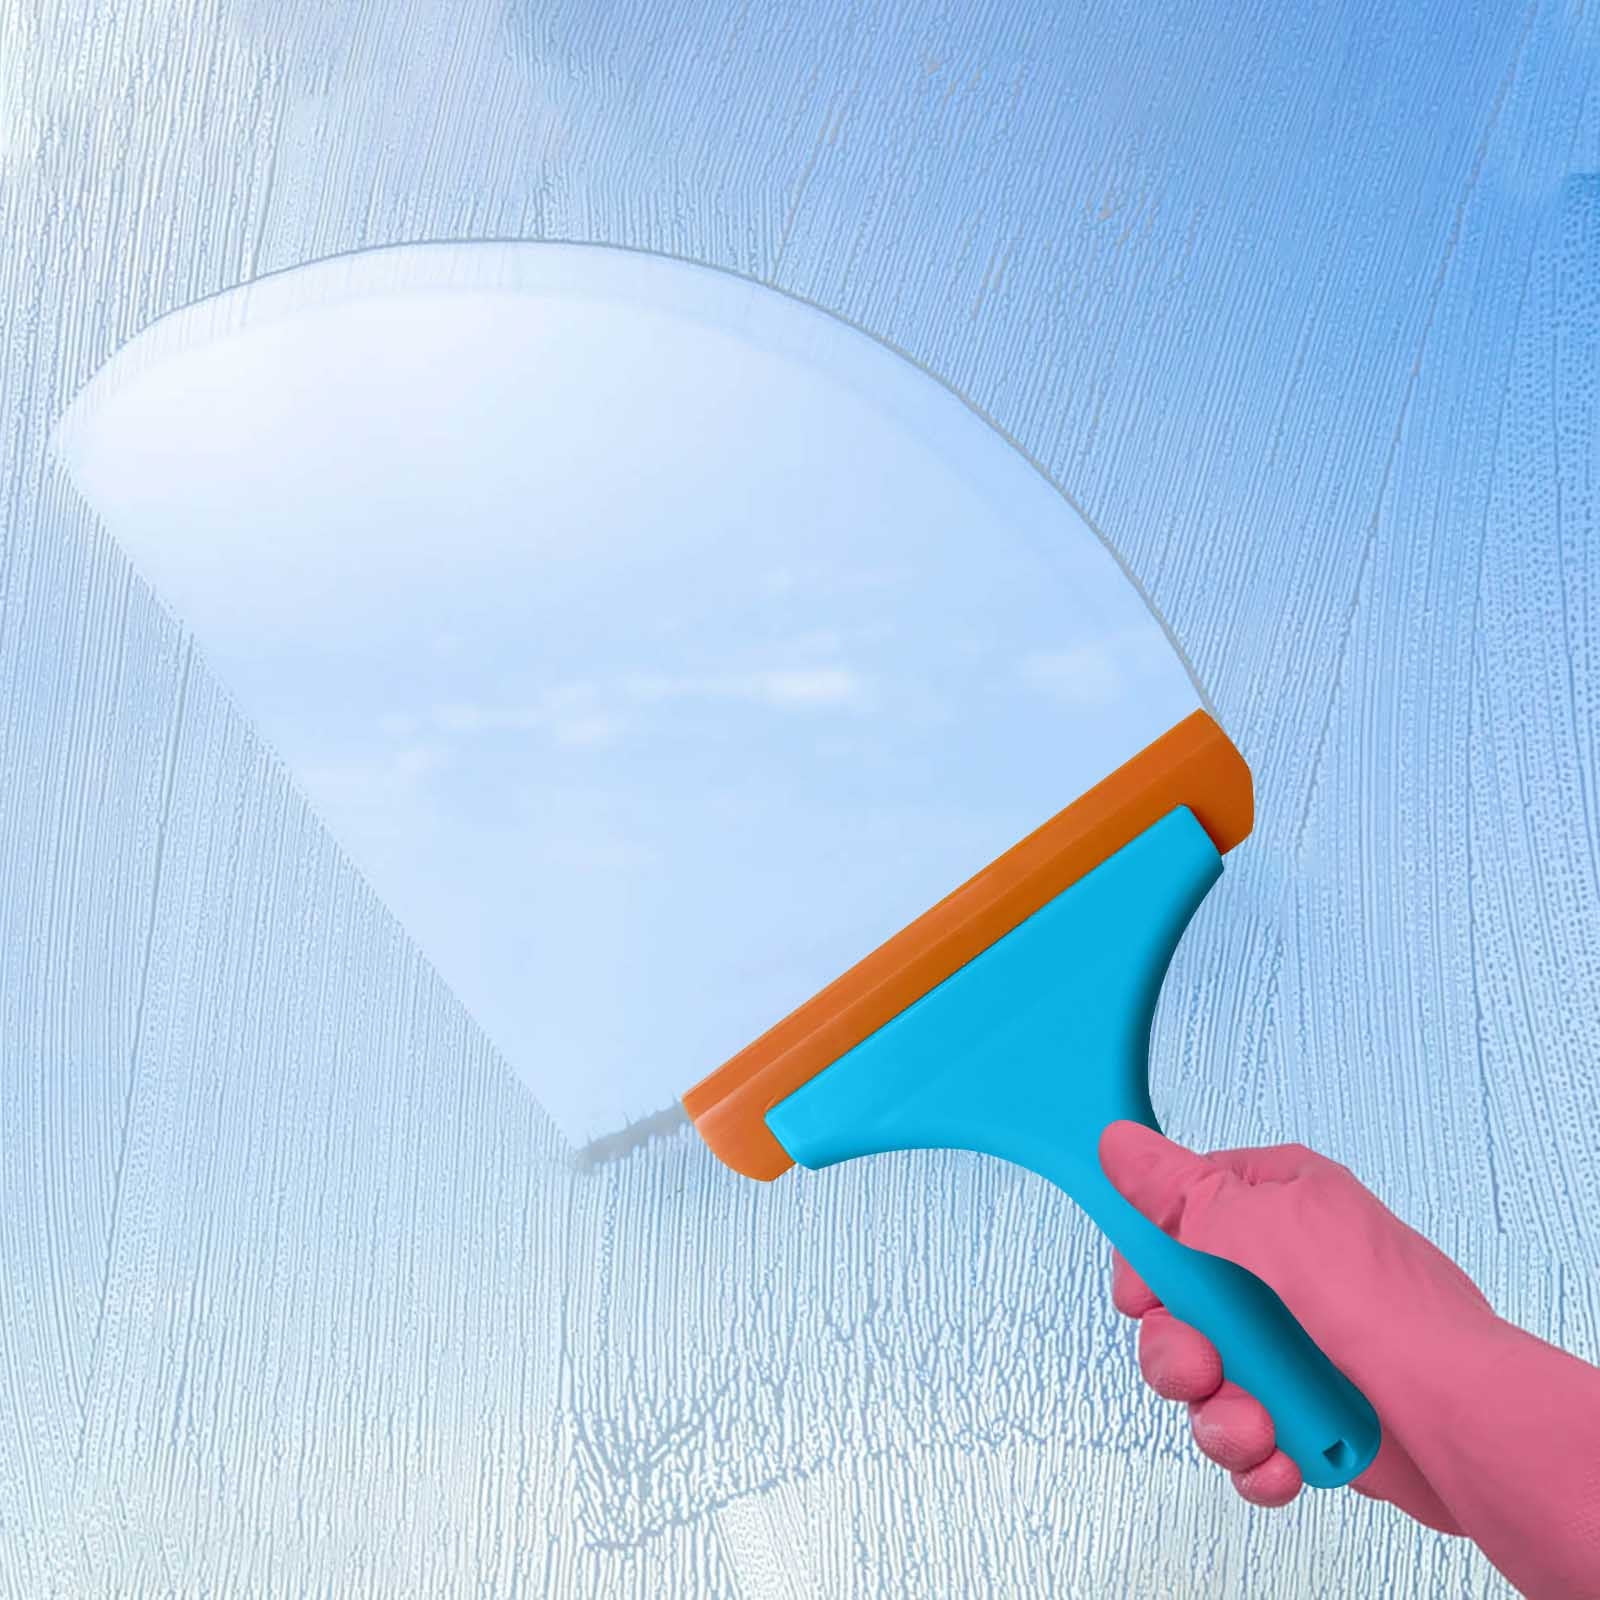 dclobtop RNAB0BG2NKNLR 2 pack silicone small squeegee